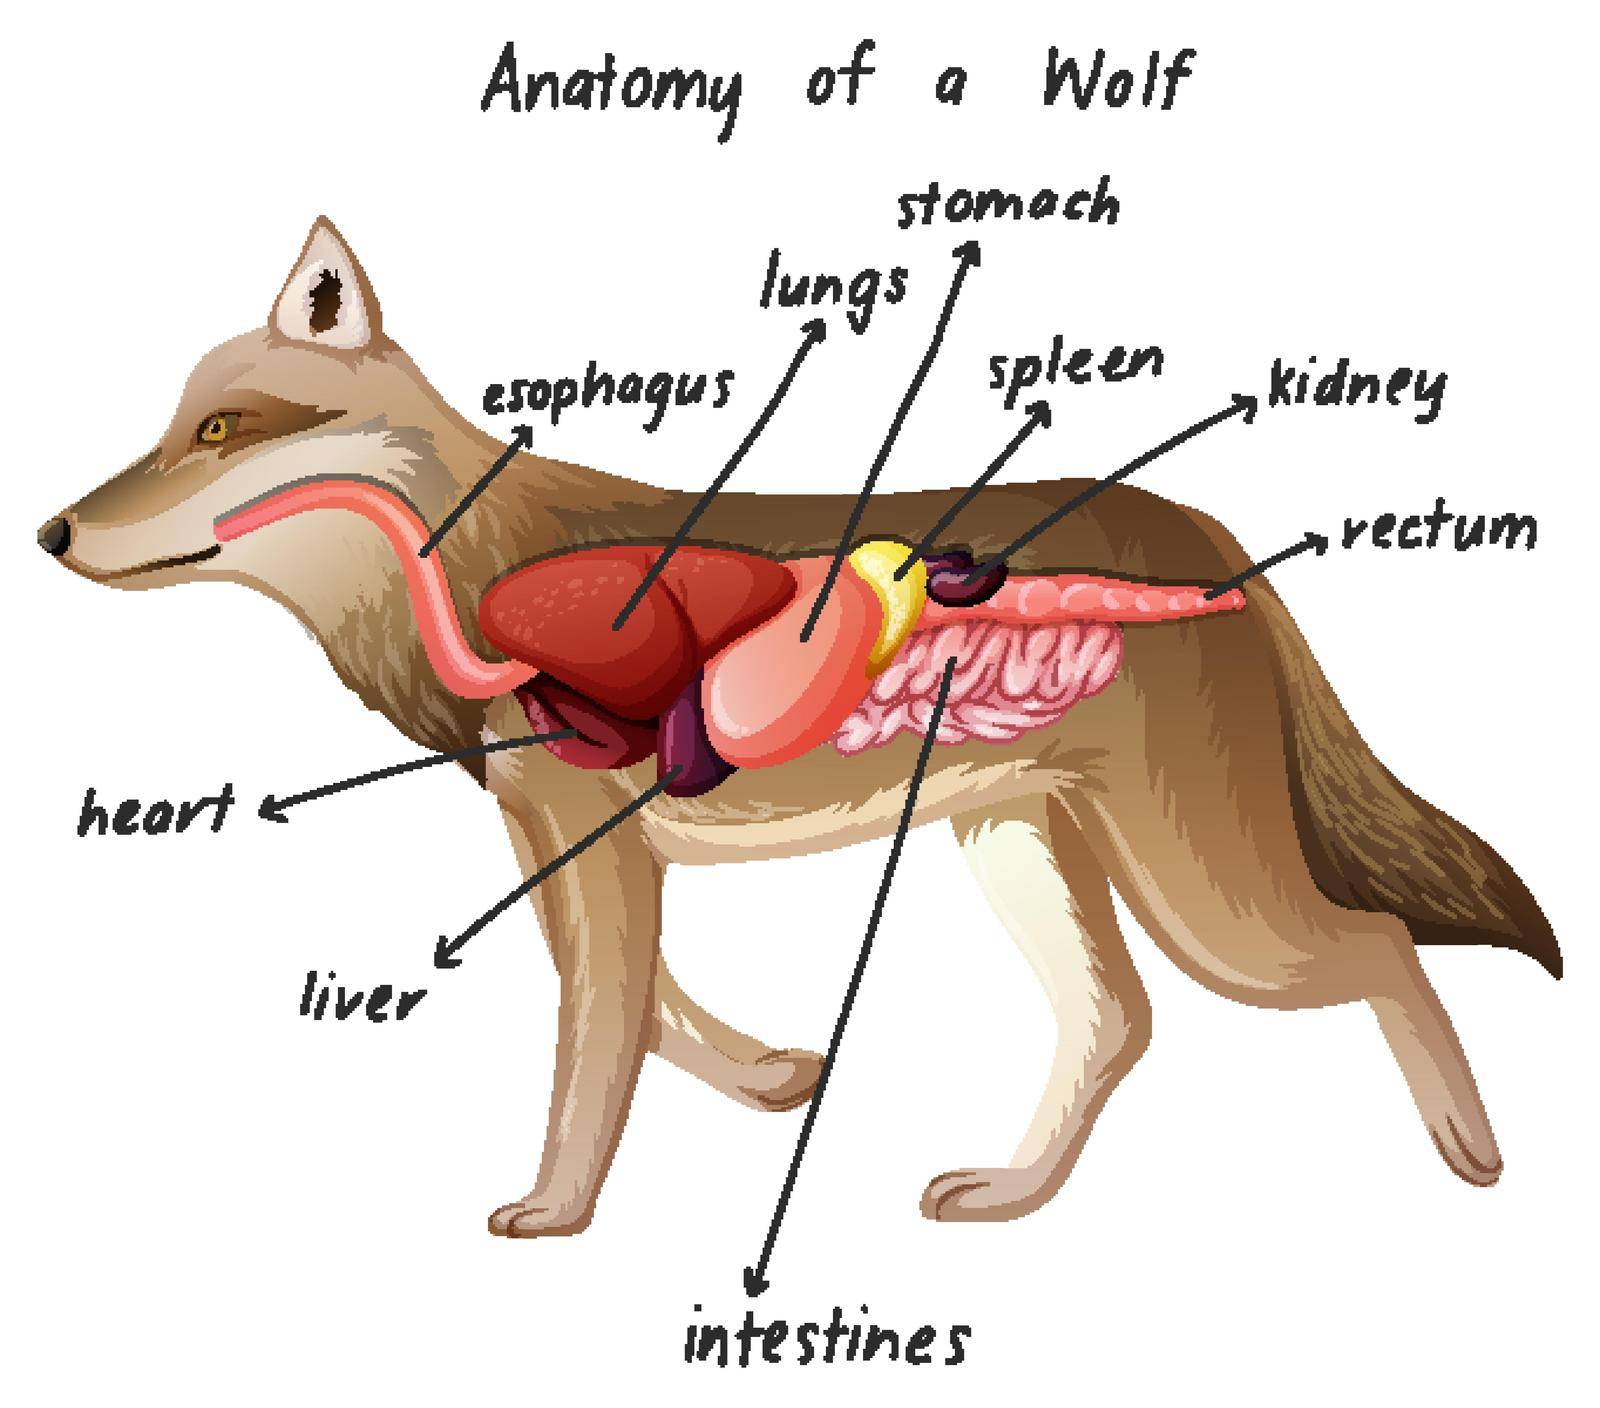 Anatomy of a Wolf by iimages